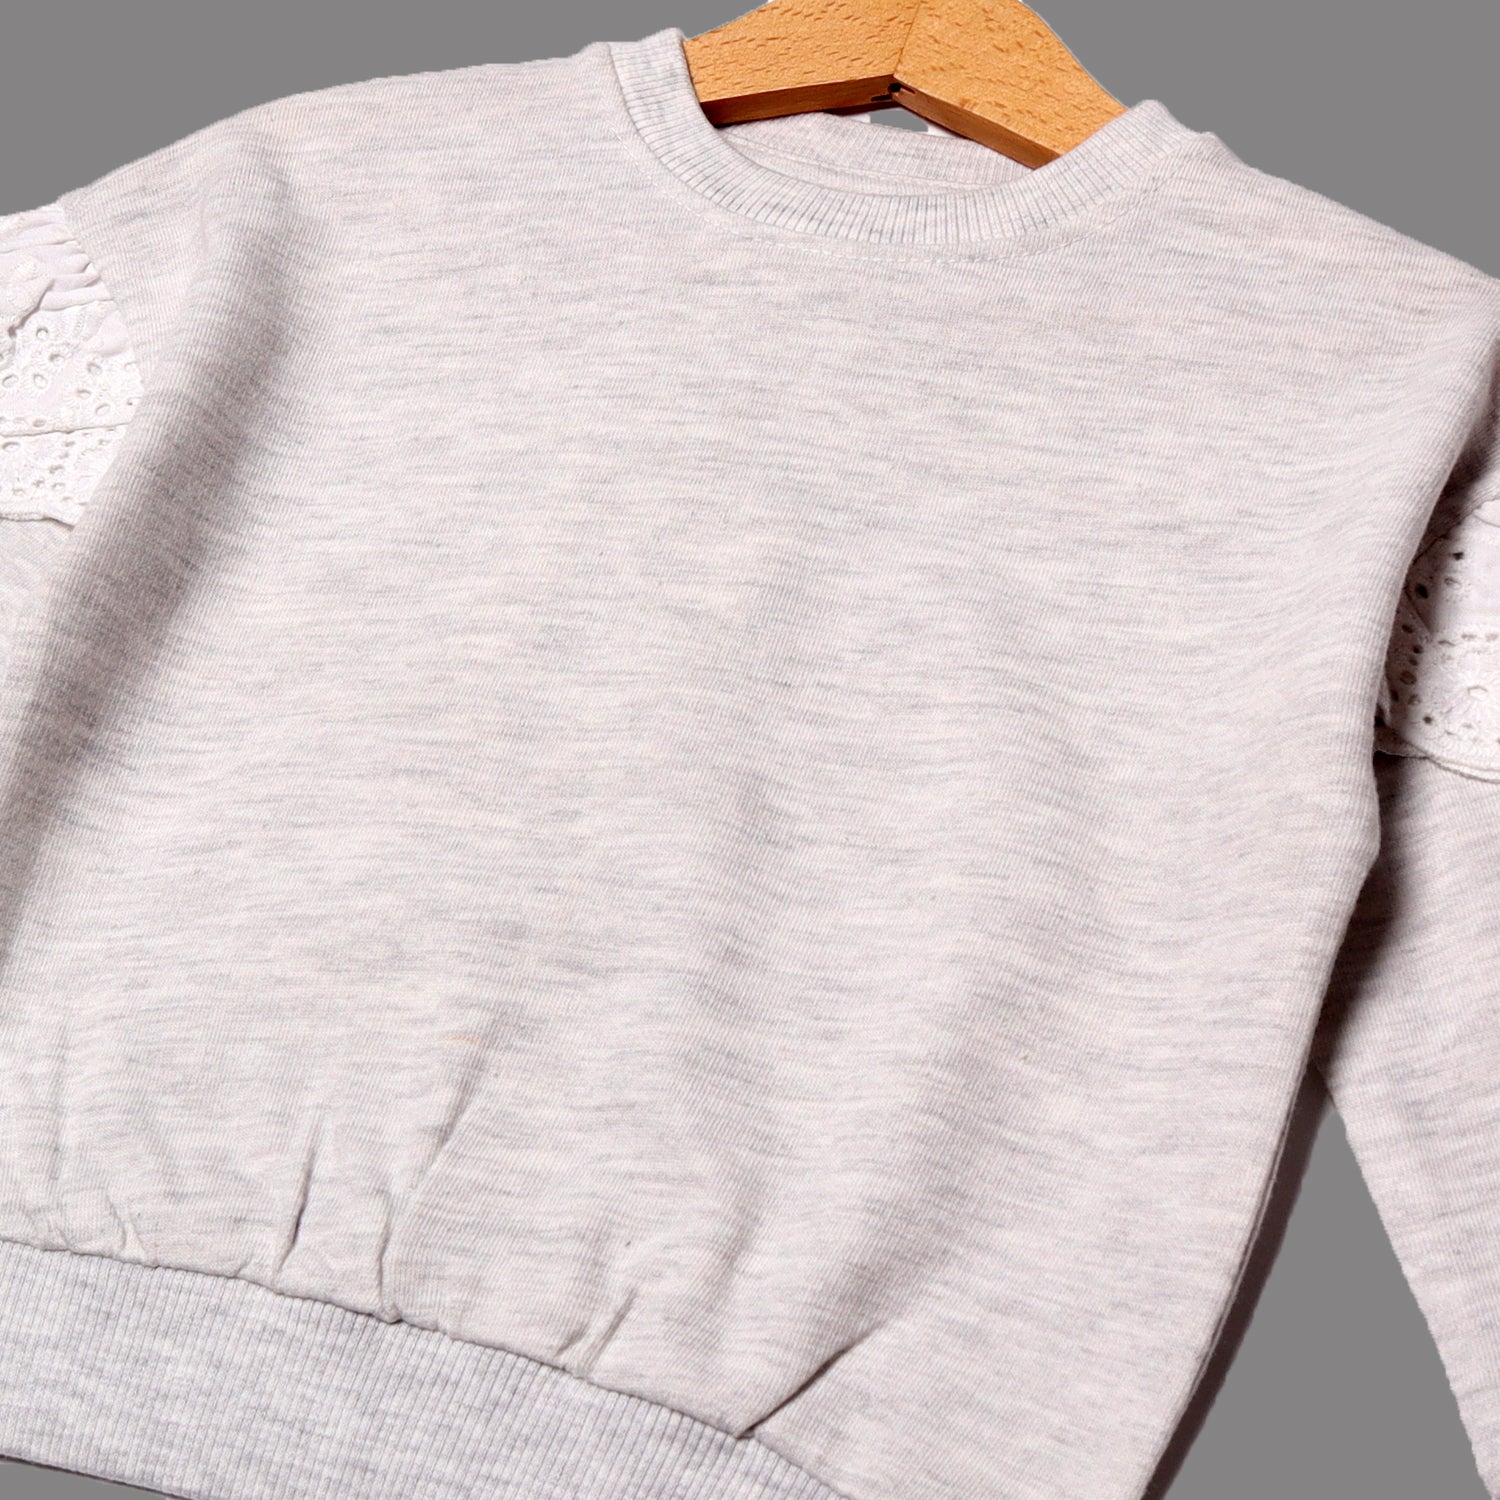 GREY WITH FRIL SLEEVES PLAIN SWEATSHIRT FOR GIRLS